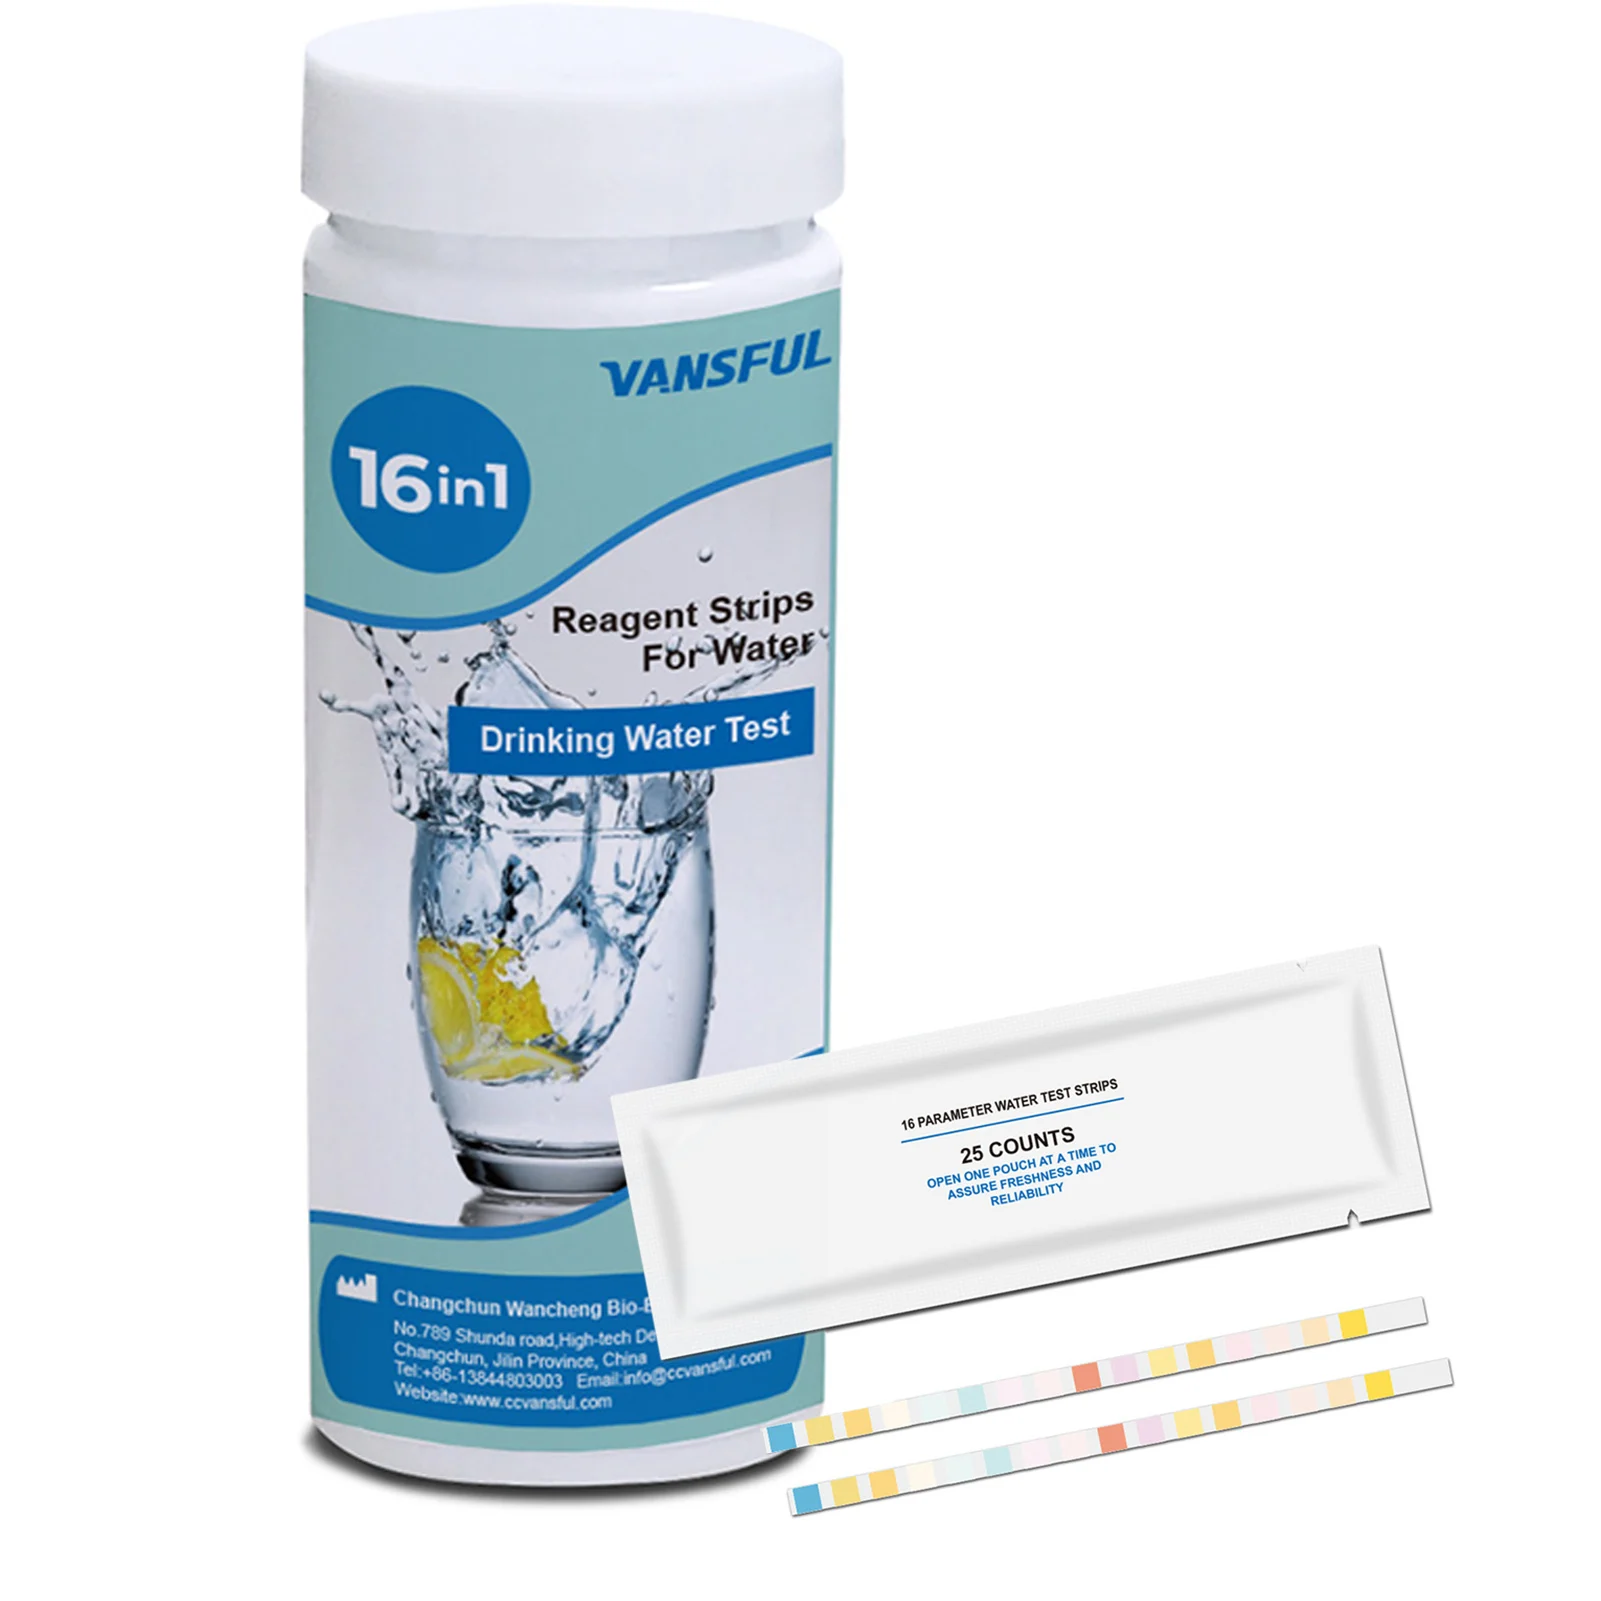 

16-in-1 Water Test Strips Great Kit For Accurate Water Testing At Home Water Test Strips For Swimming Pool Hot Tub And Drinking